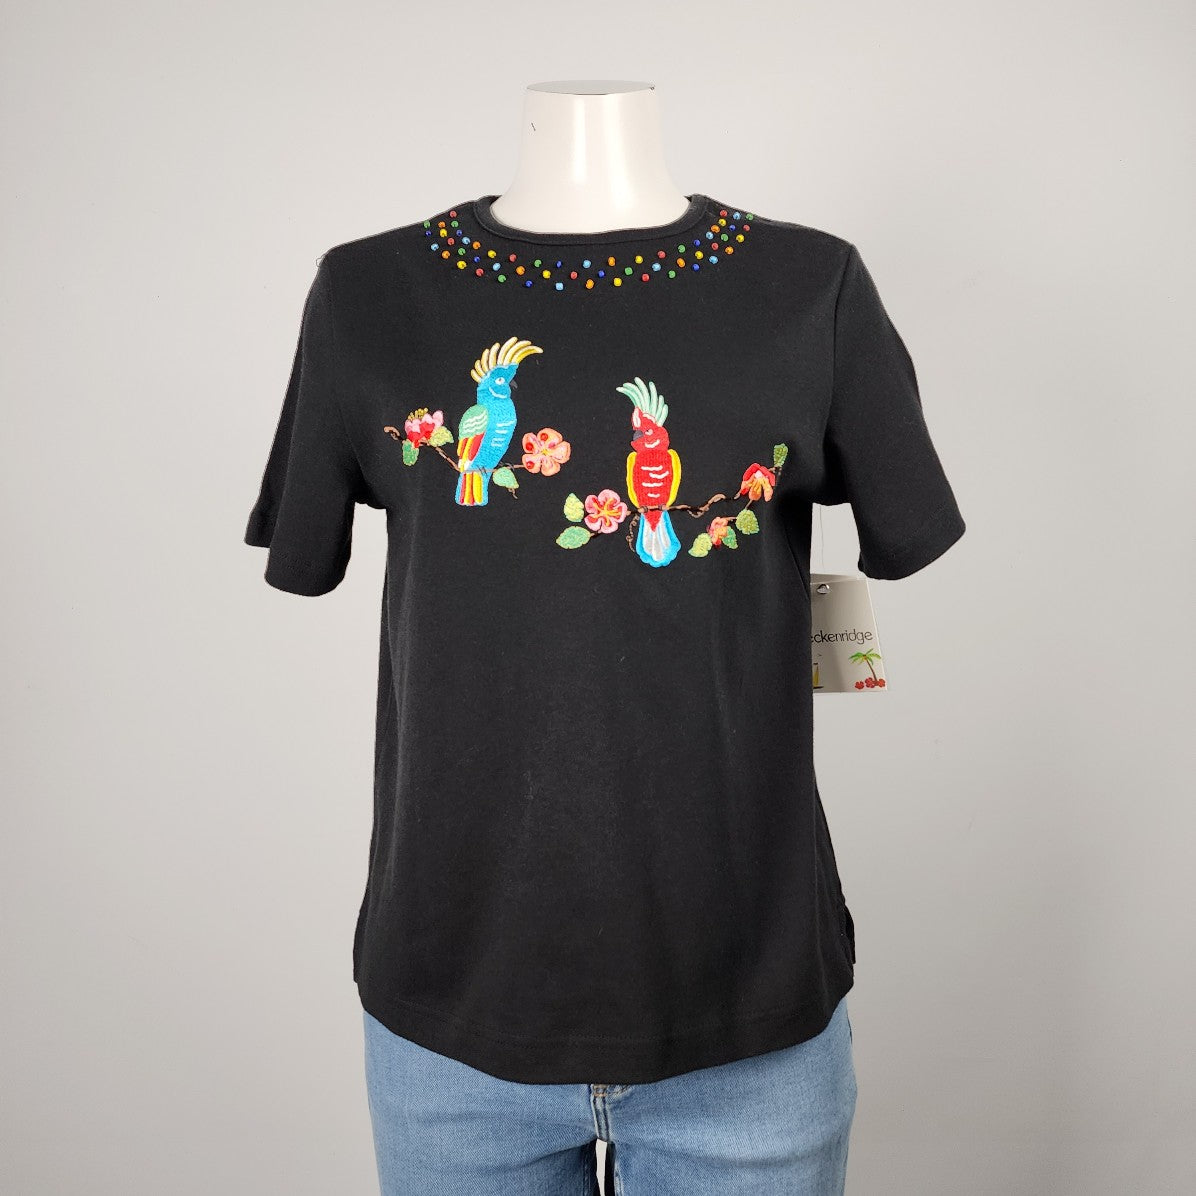 Vintage Breckenridge Black Cotton Embroidered Bird Floral Beaded T-shirt Top Size S